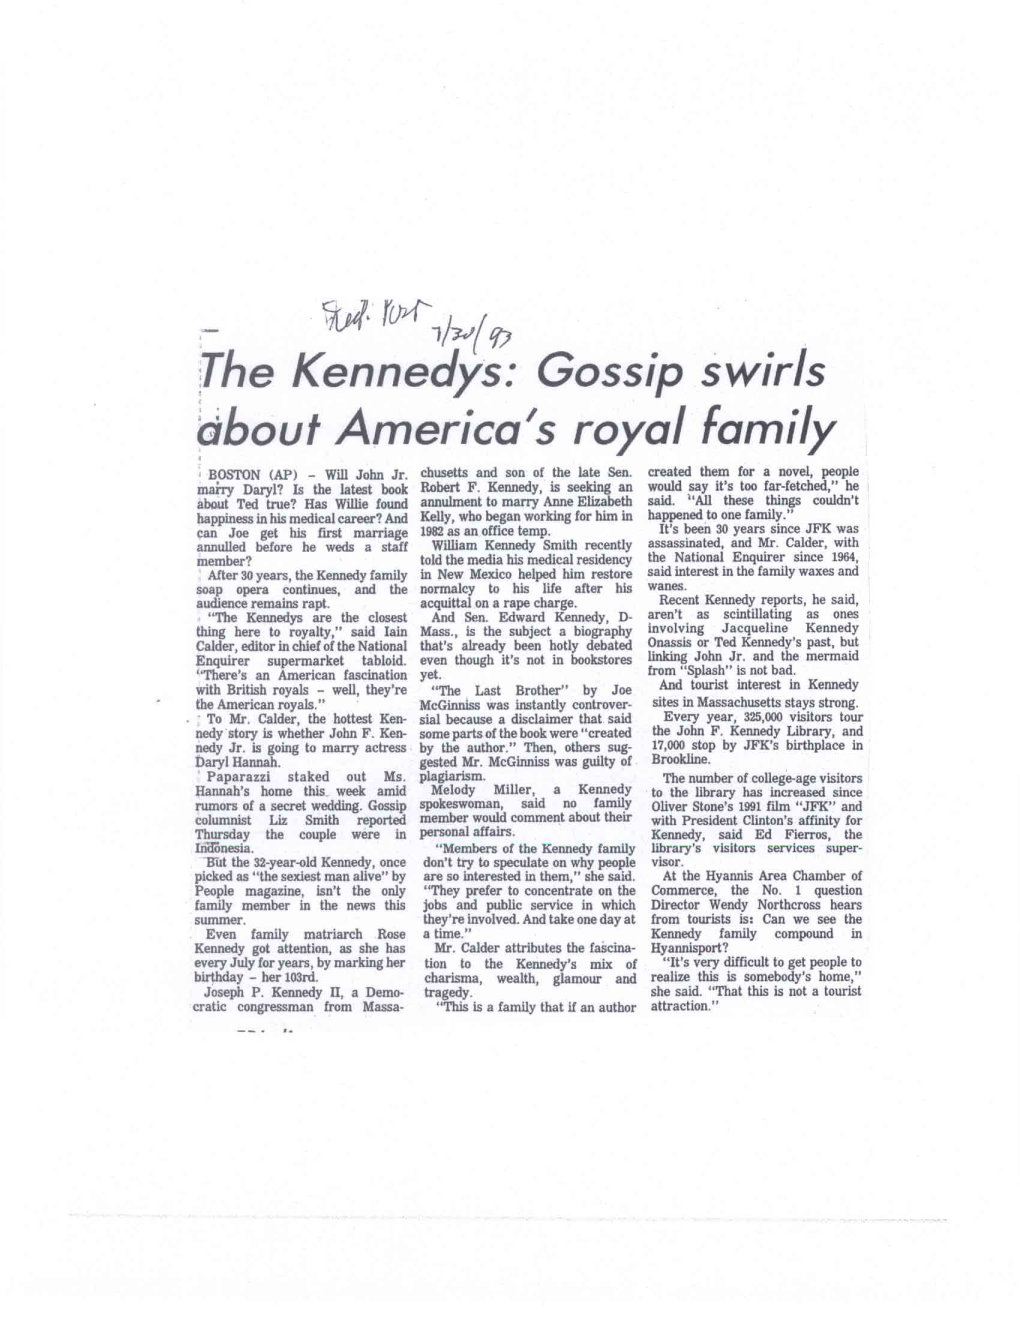 The Kennedys: Gossip Swirls About America's Royal Family